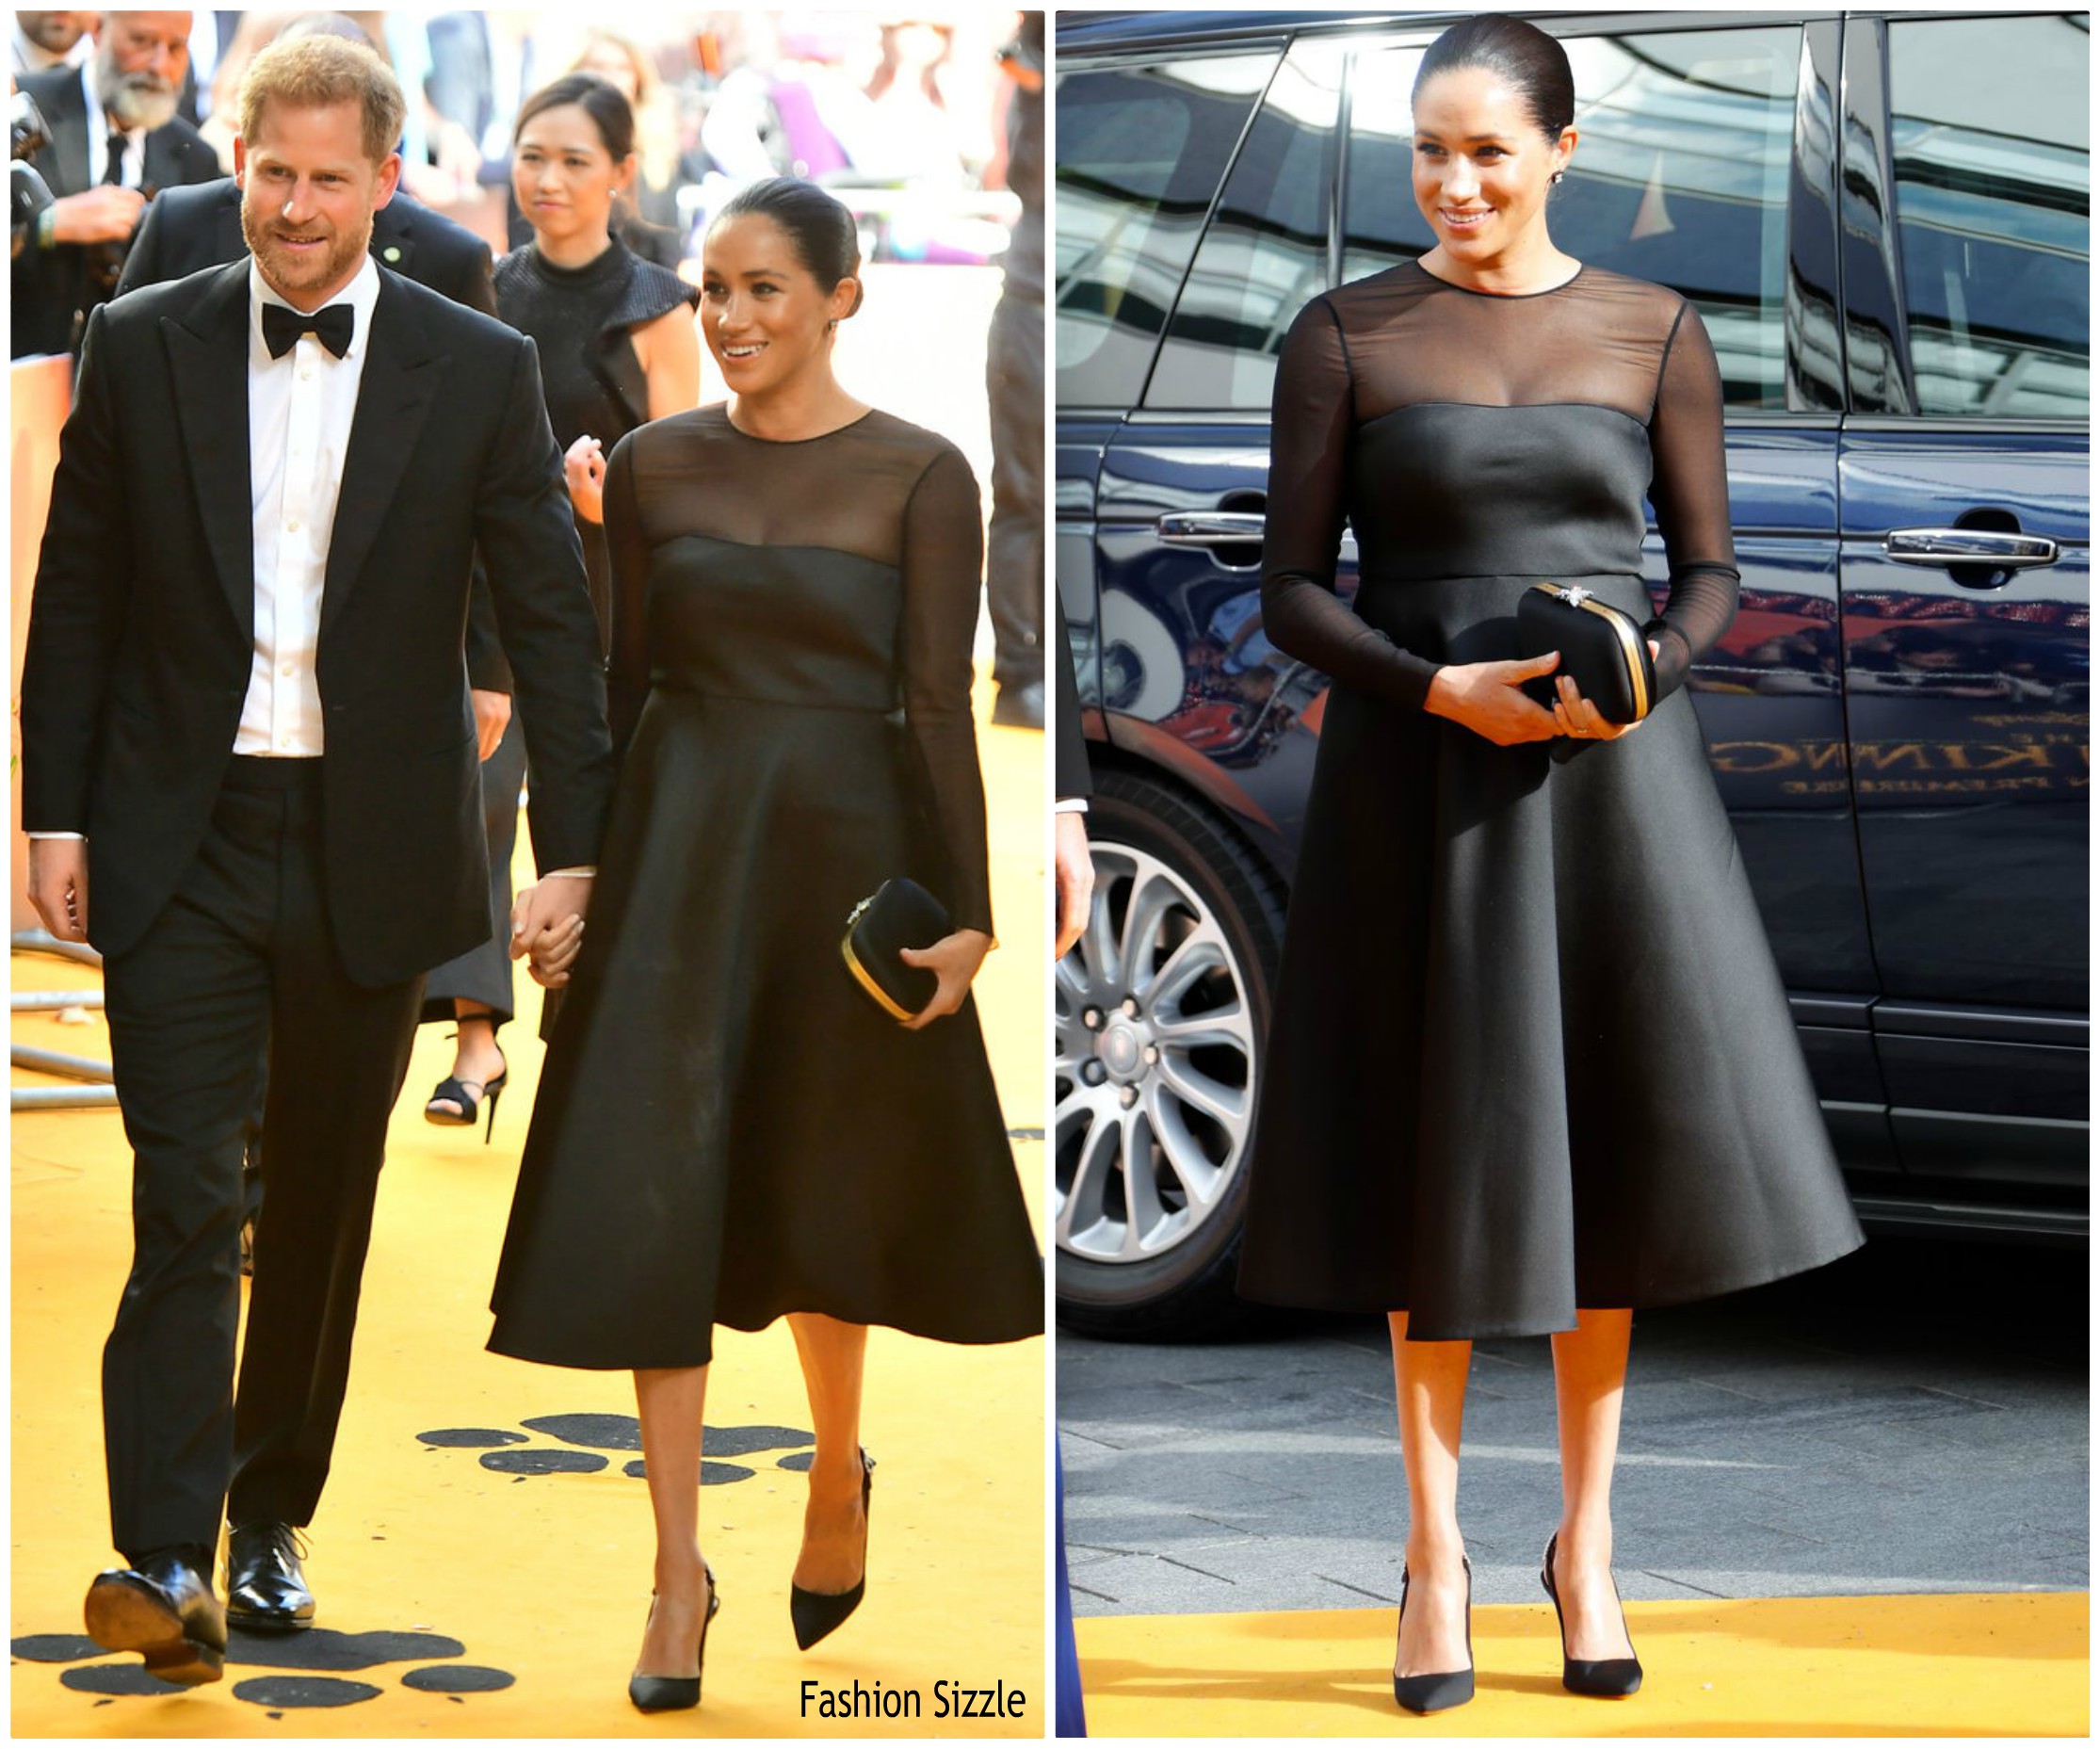 meghan-duchess-of-sussex-prince-harry-attends-the-lion-king-london-premiere